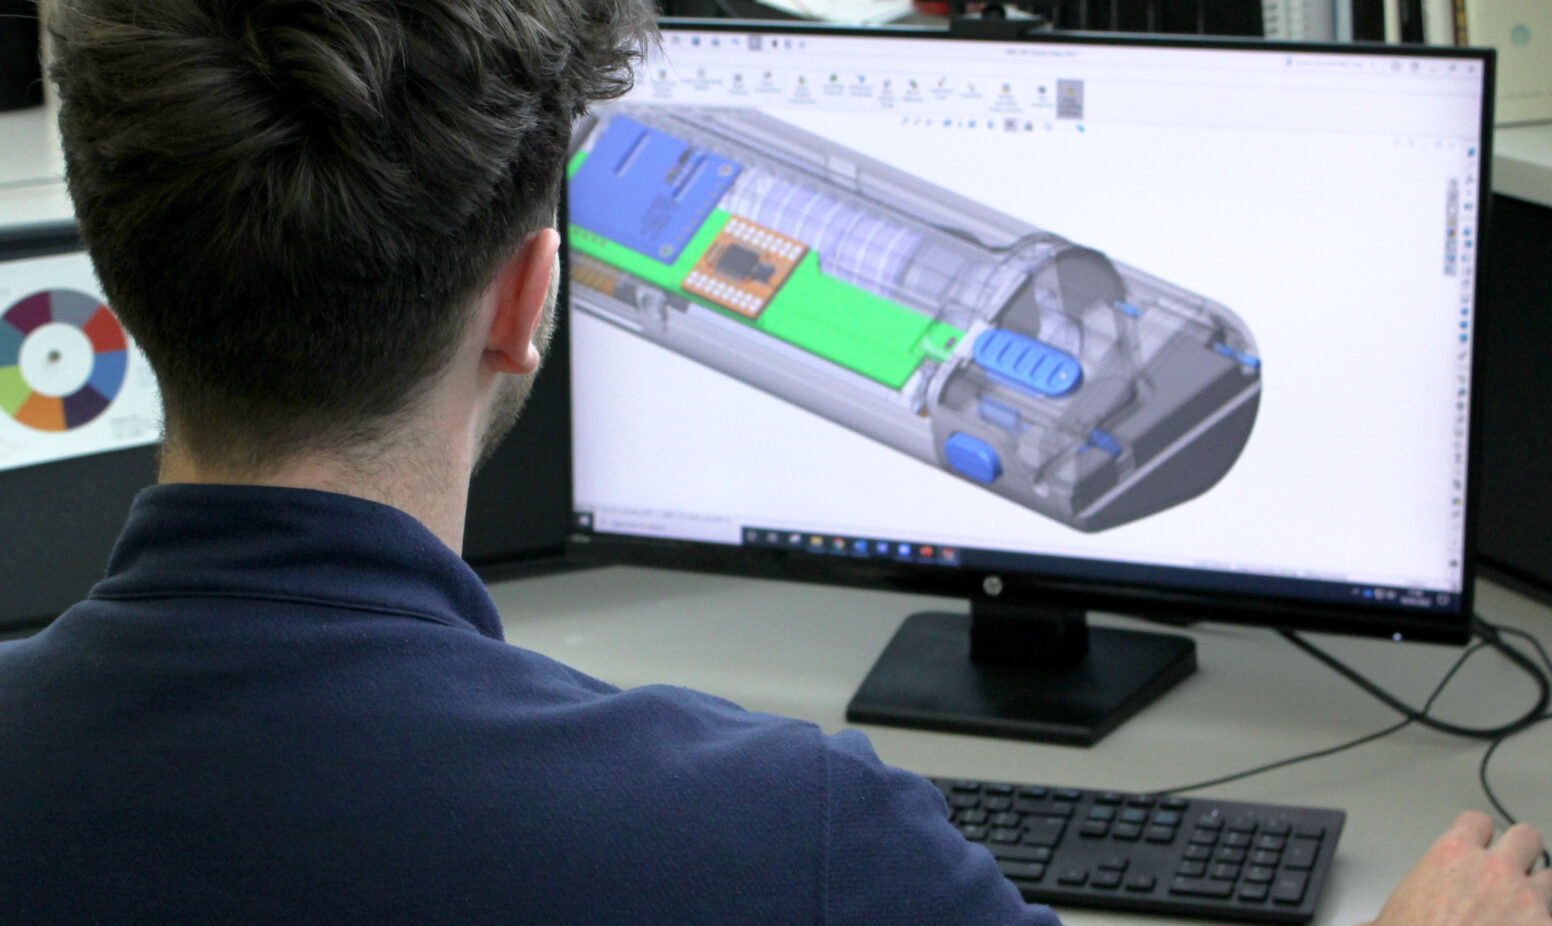 Engineering Design and Simulation capability